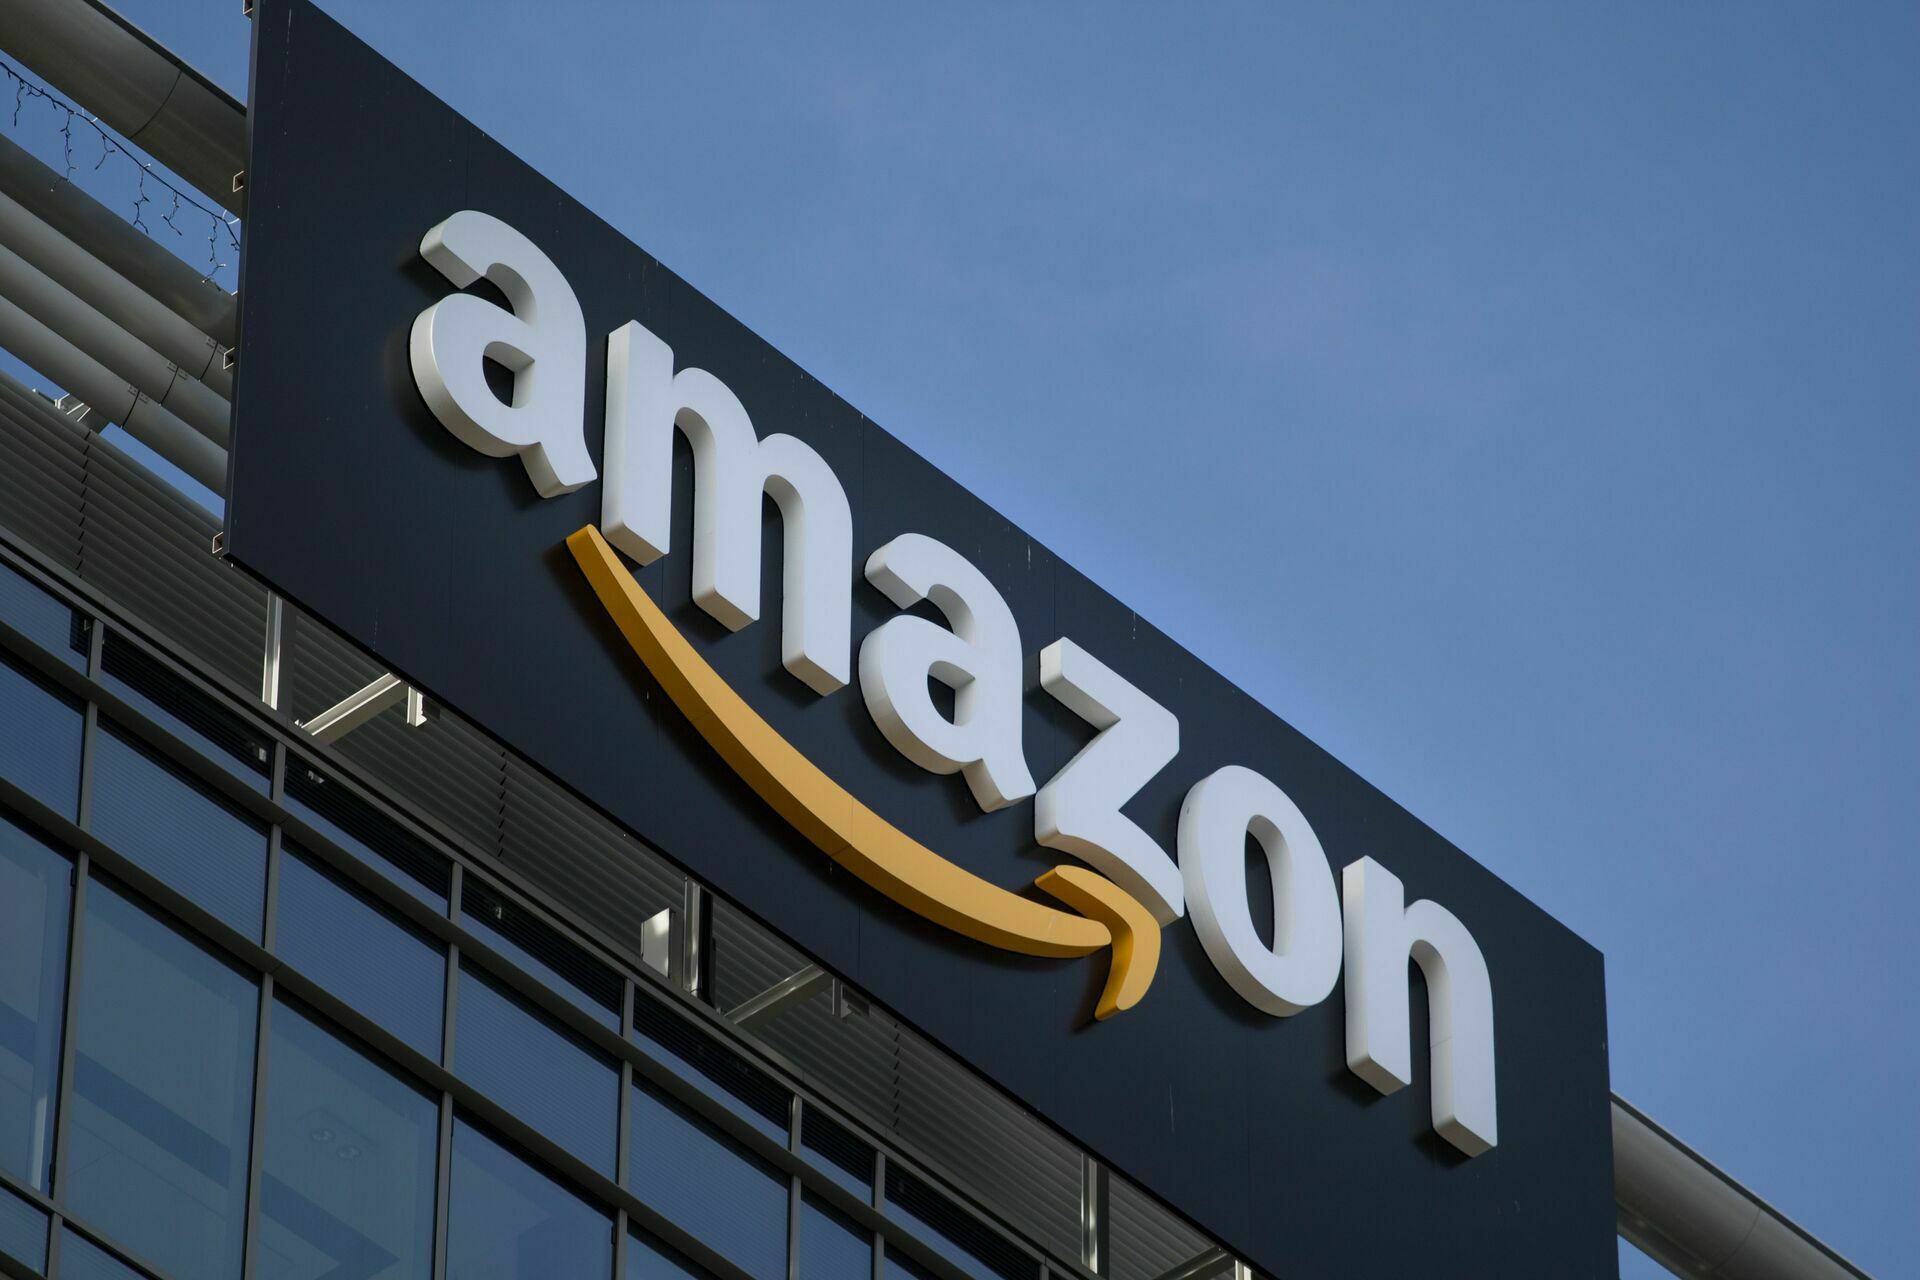 Amazon was fined for shipping goods to Crimea